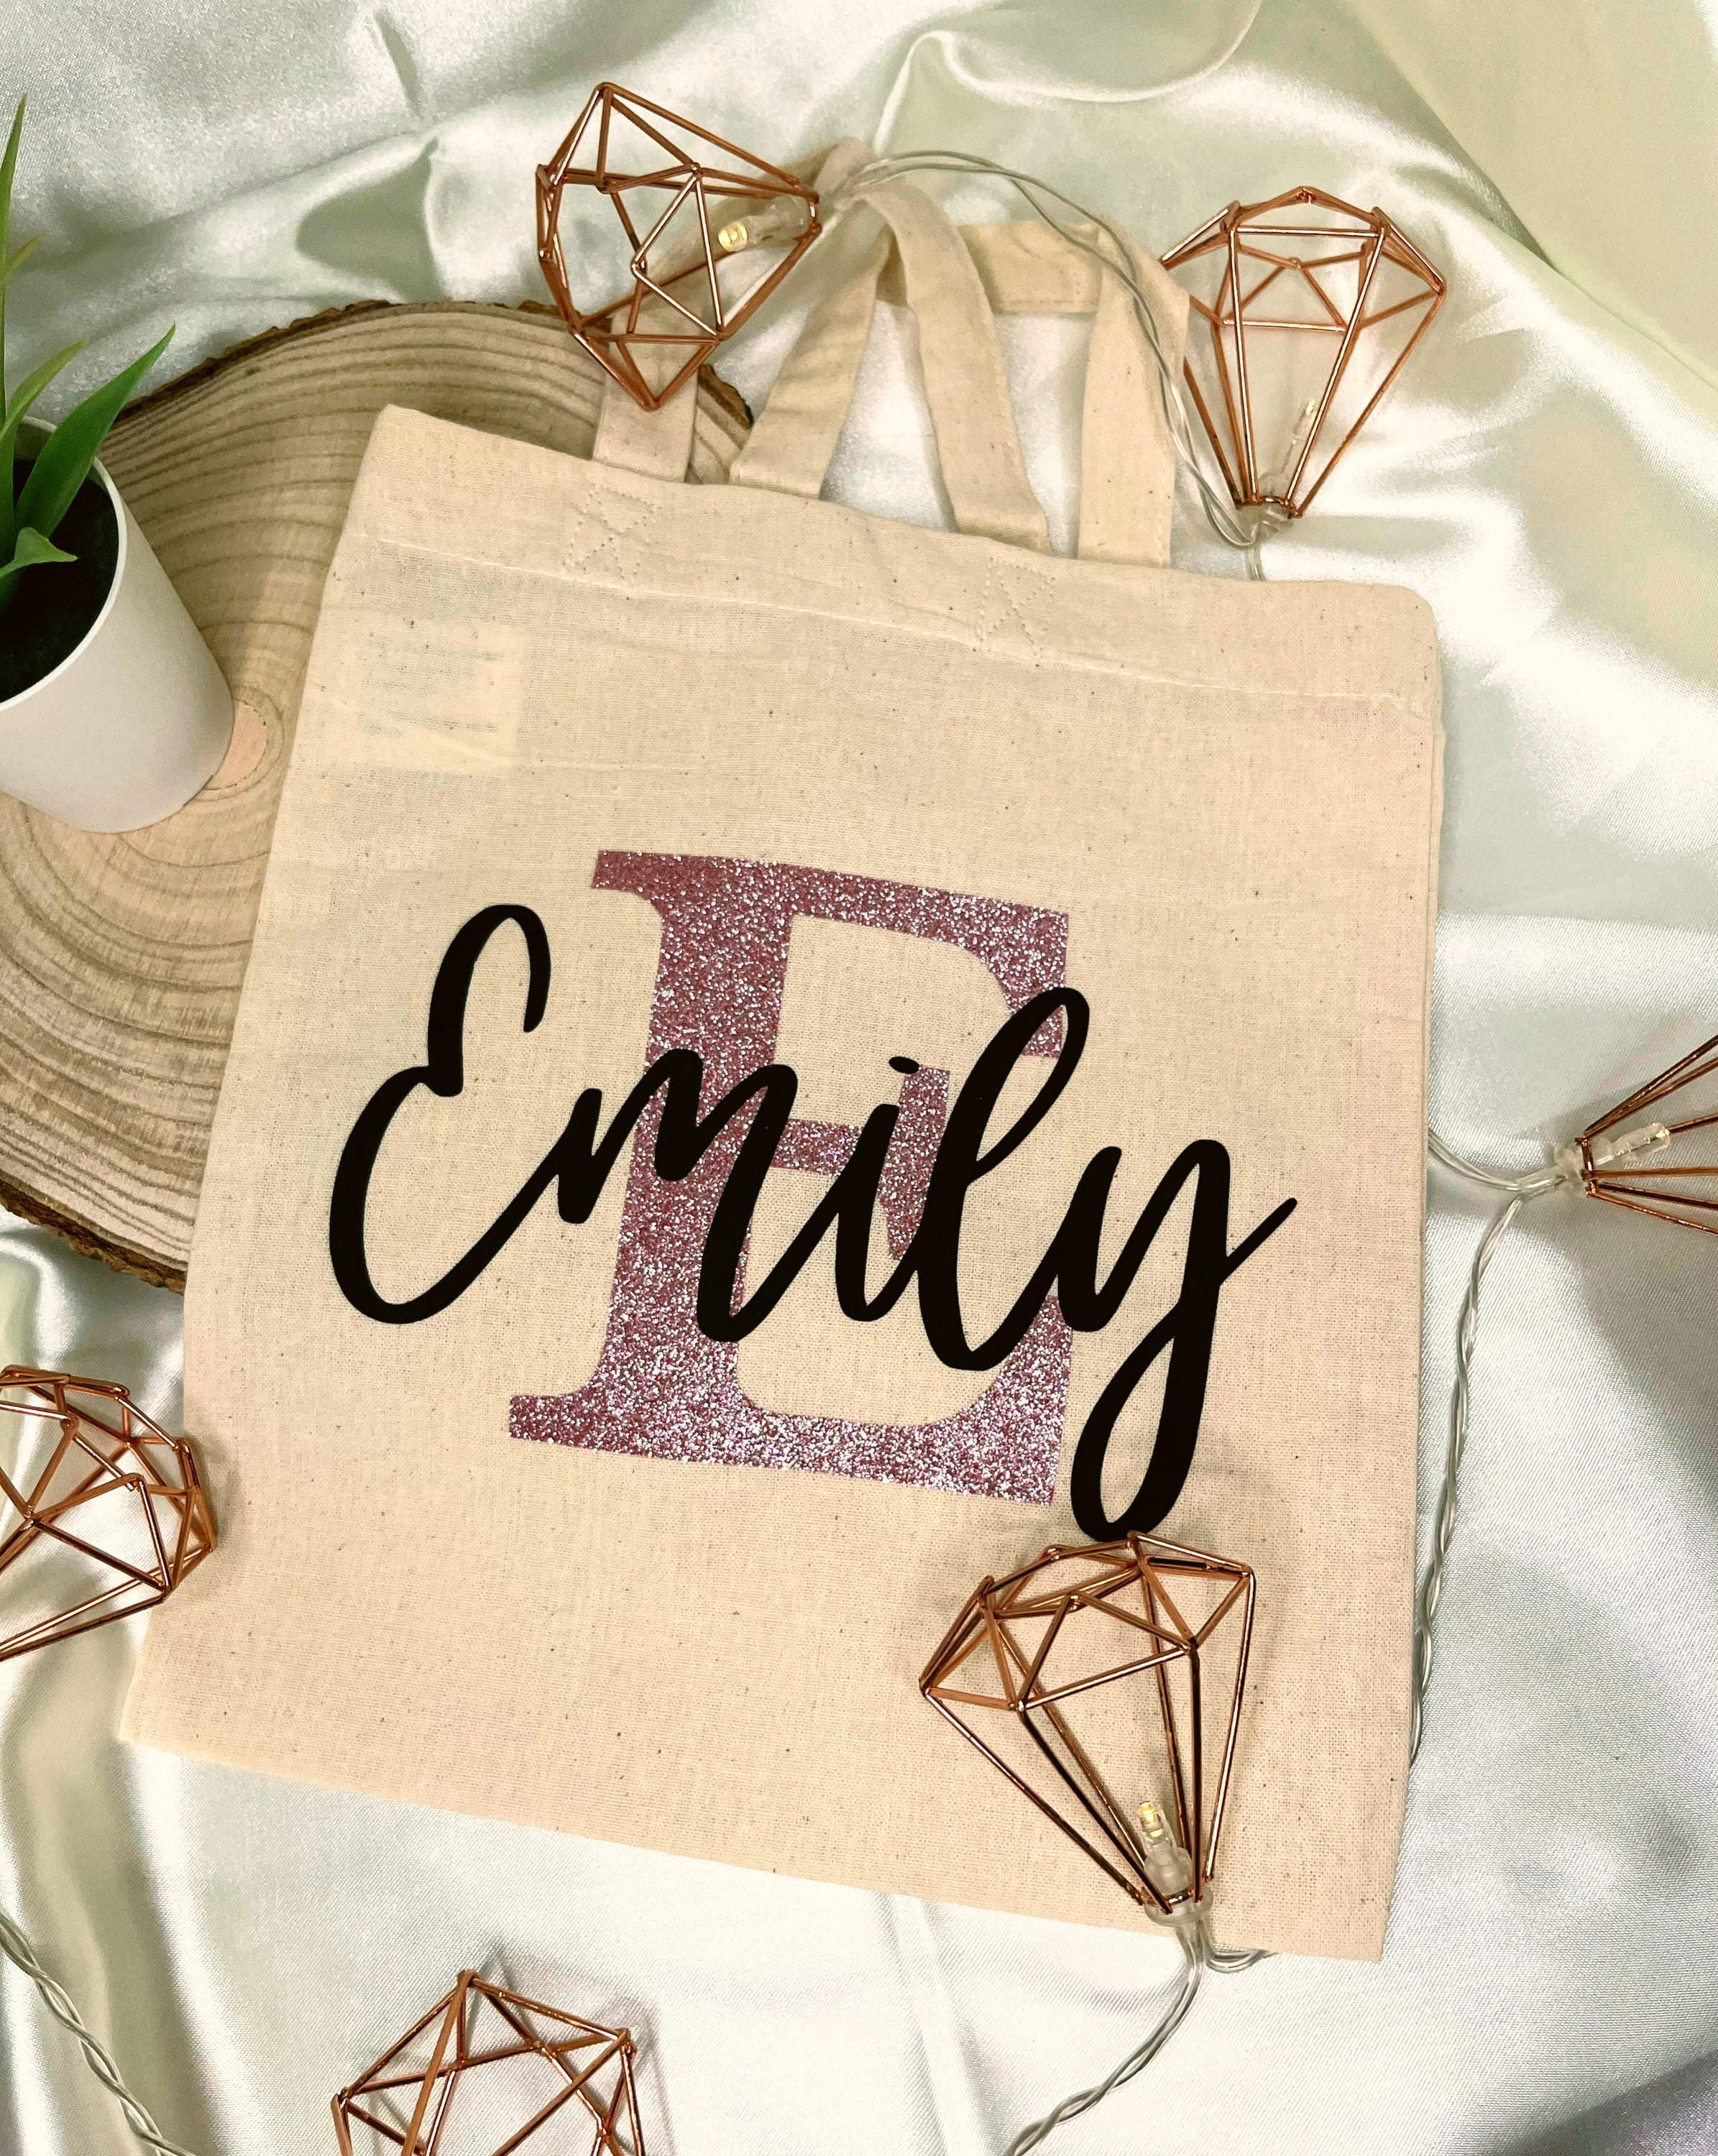 How to Make Personalized Tote Bags for Kids 